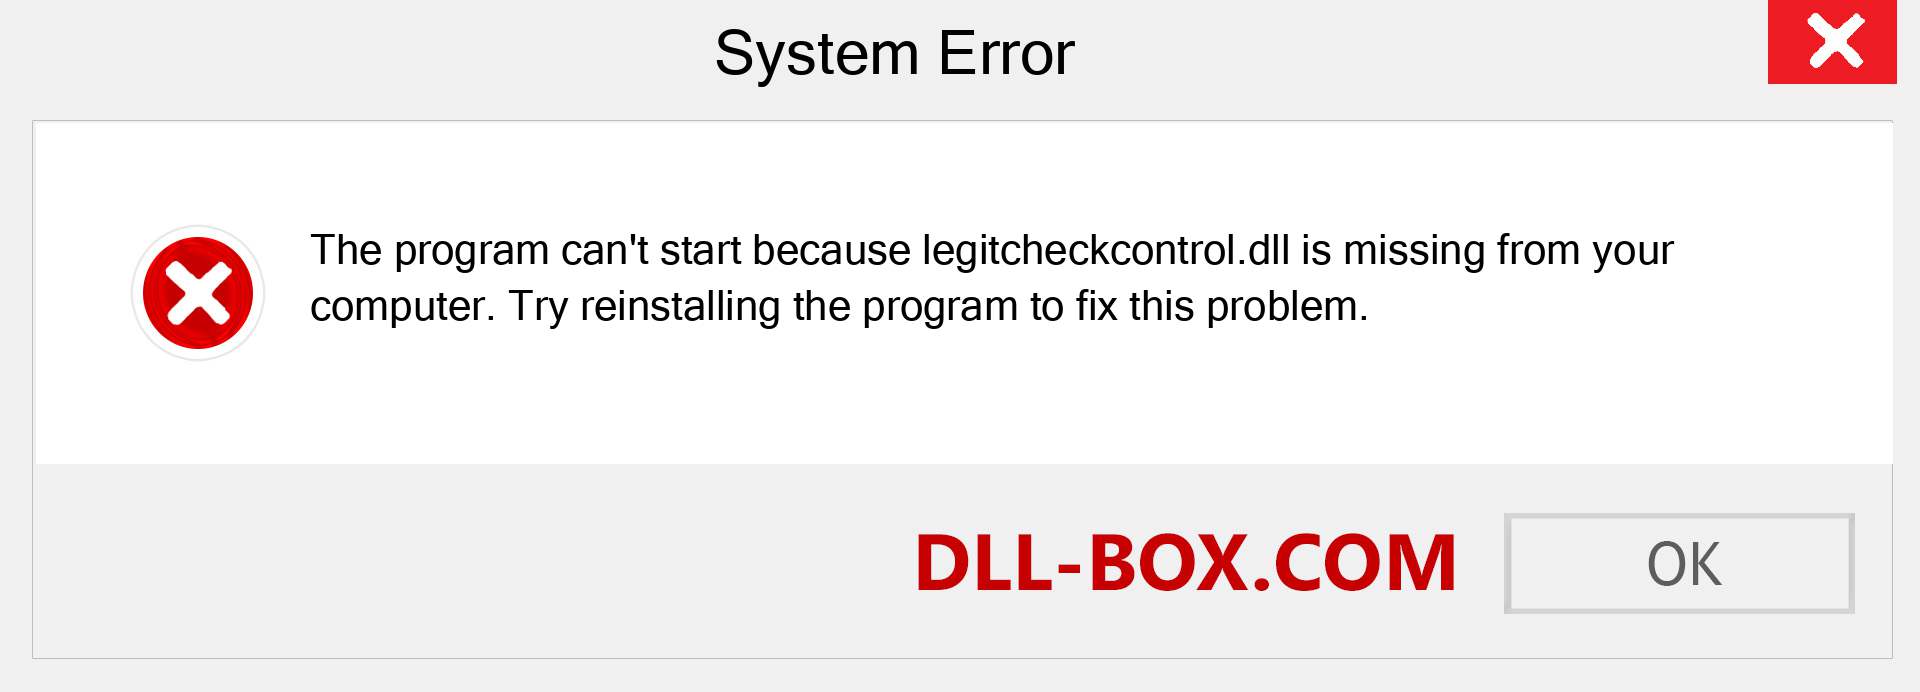  legitcheckcontrol.dll file is missing?. Download for Windows 7, 8, 10 - Fix  legitcheckcontrol dll Missing Error on Windows, photos, images